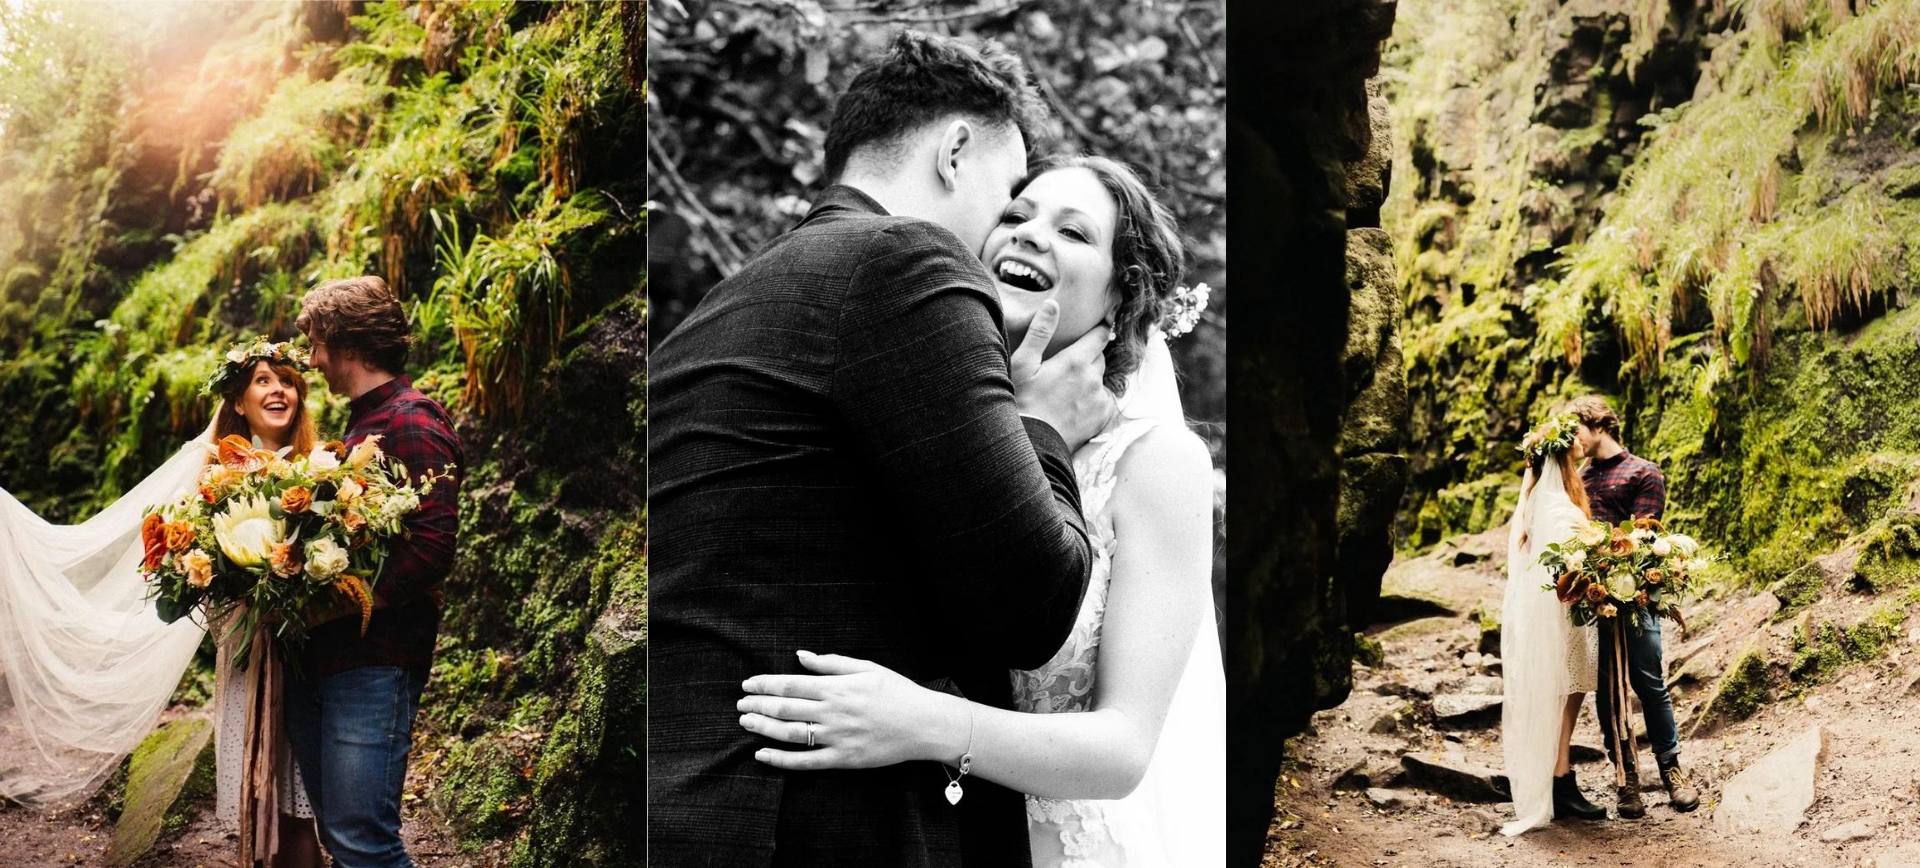 Peak Distric Elopement Package Uk - Bride & Groom at Elopement in the Forest